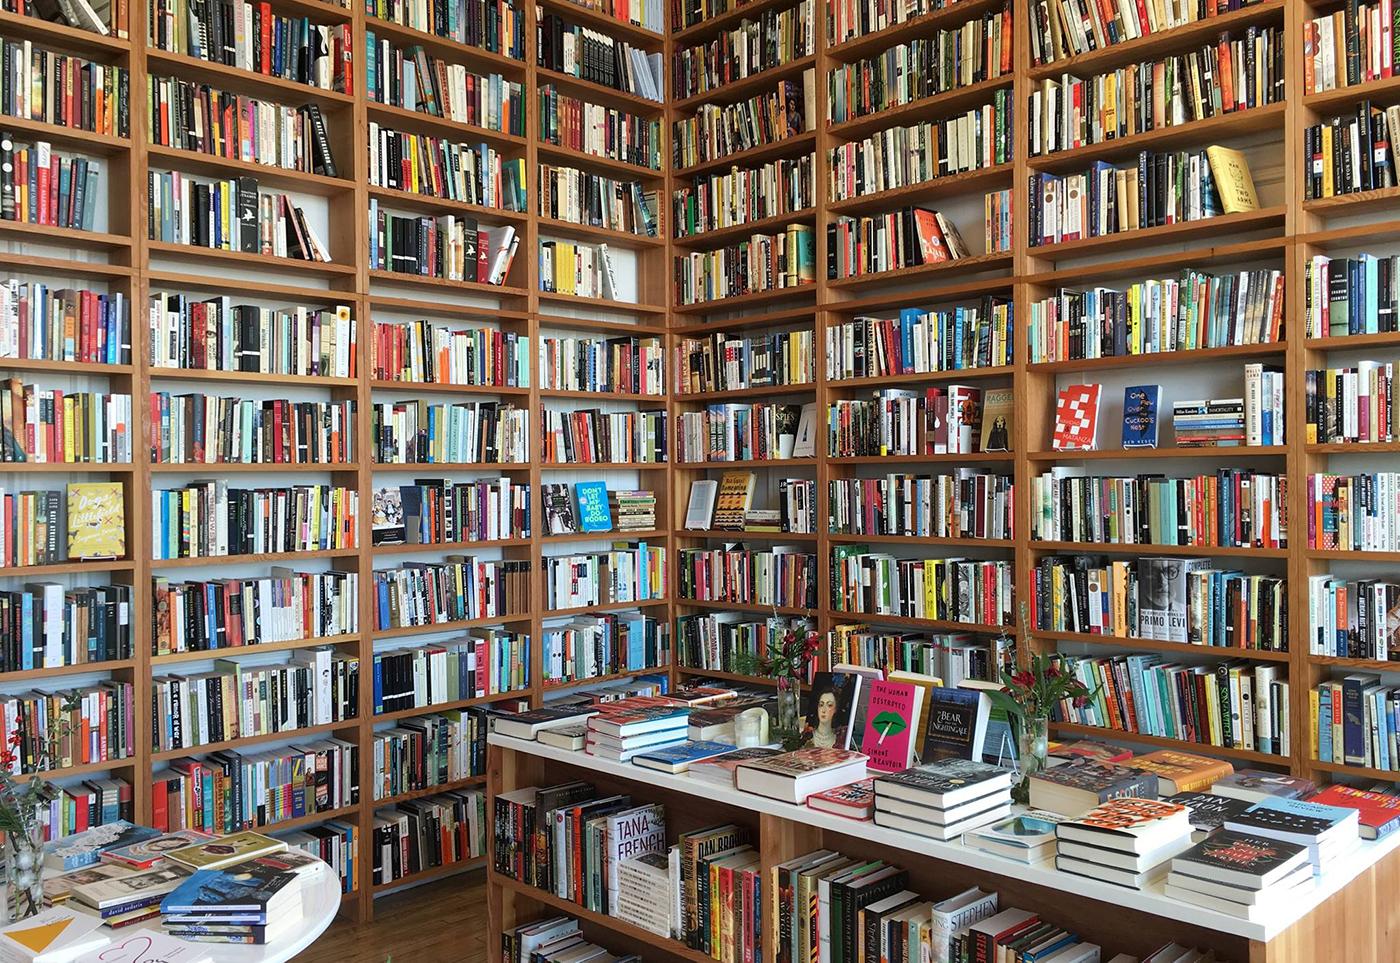 The Dial Bookshop in Chicago